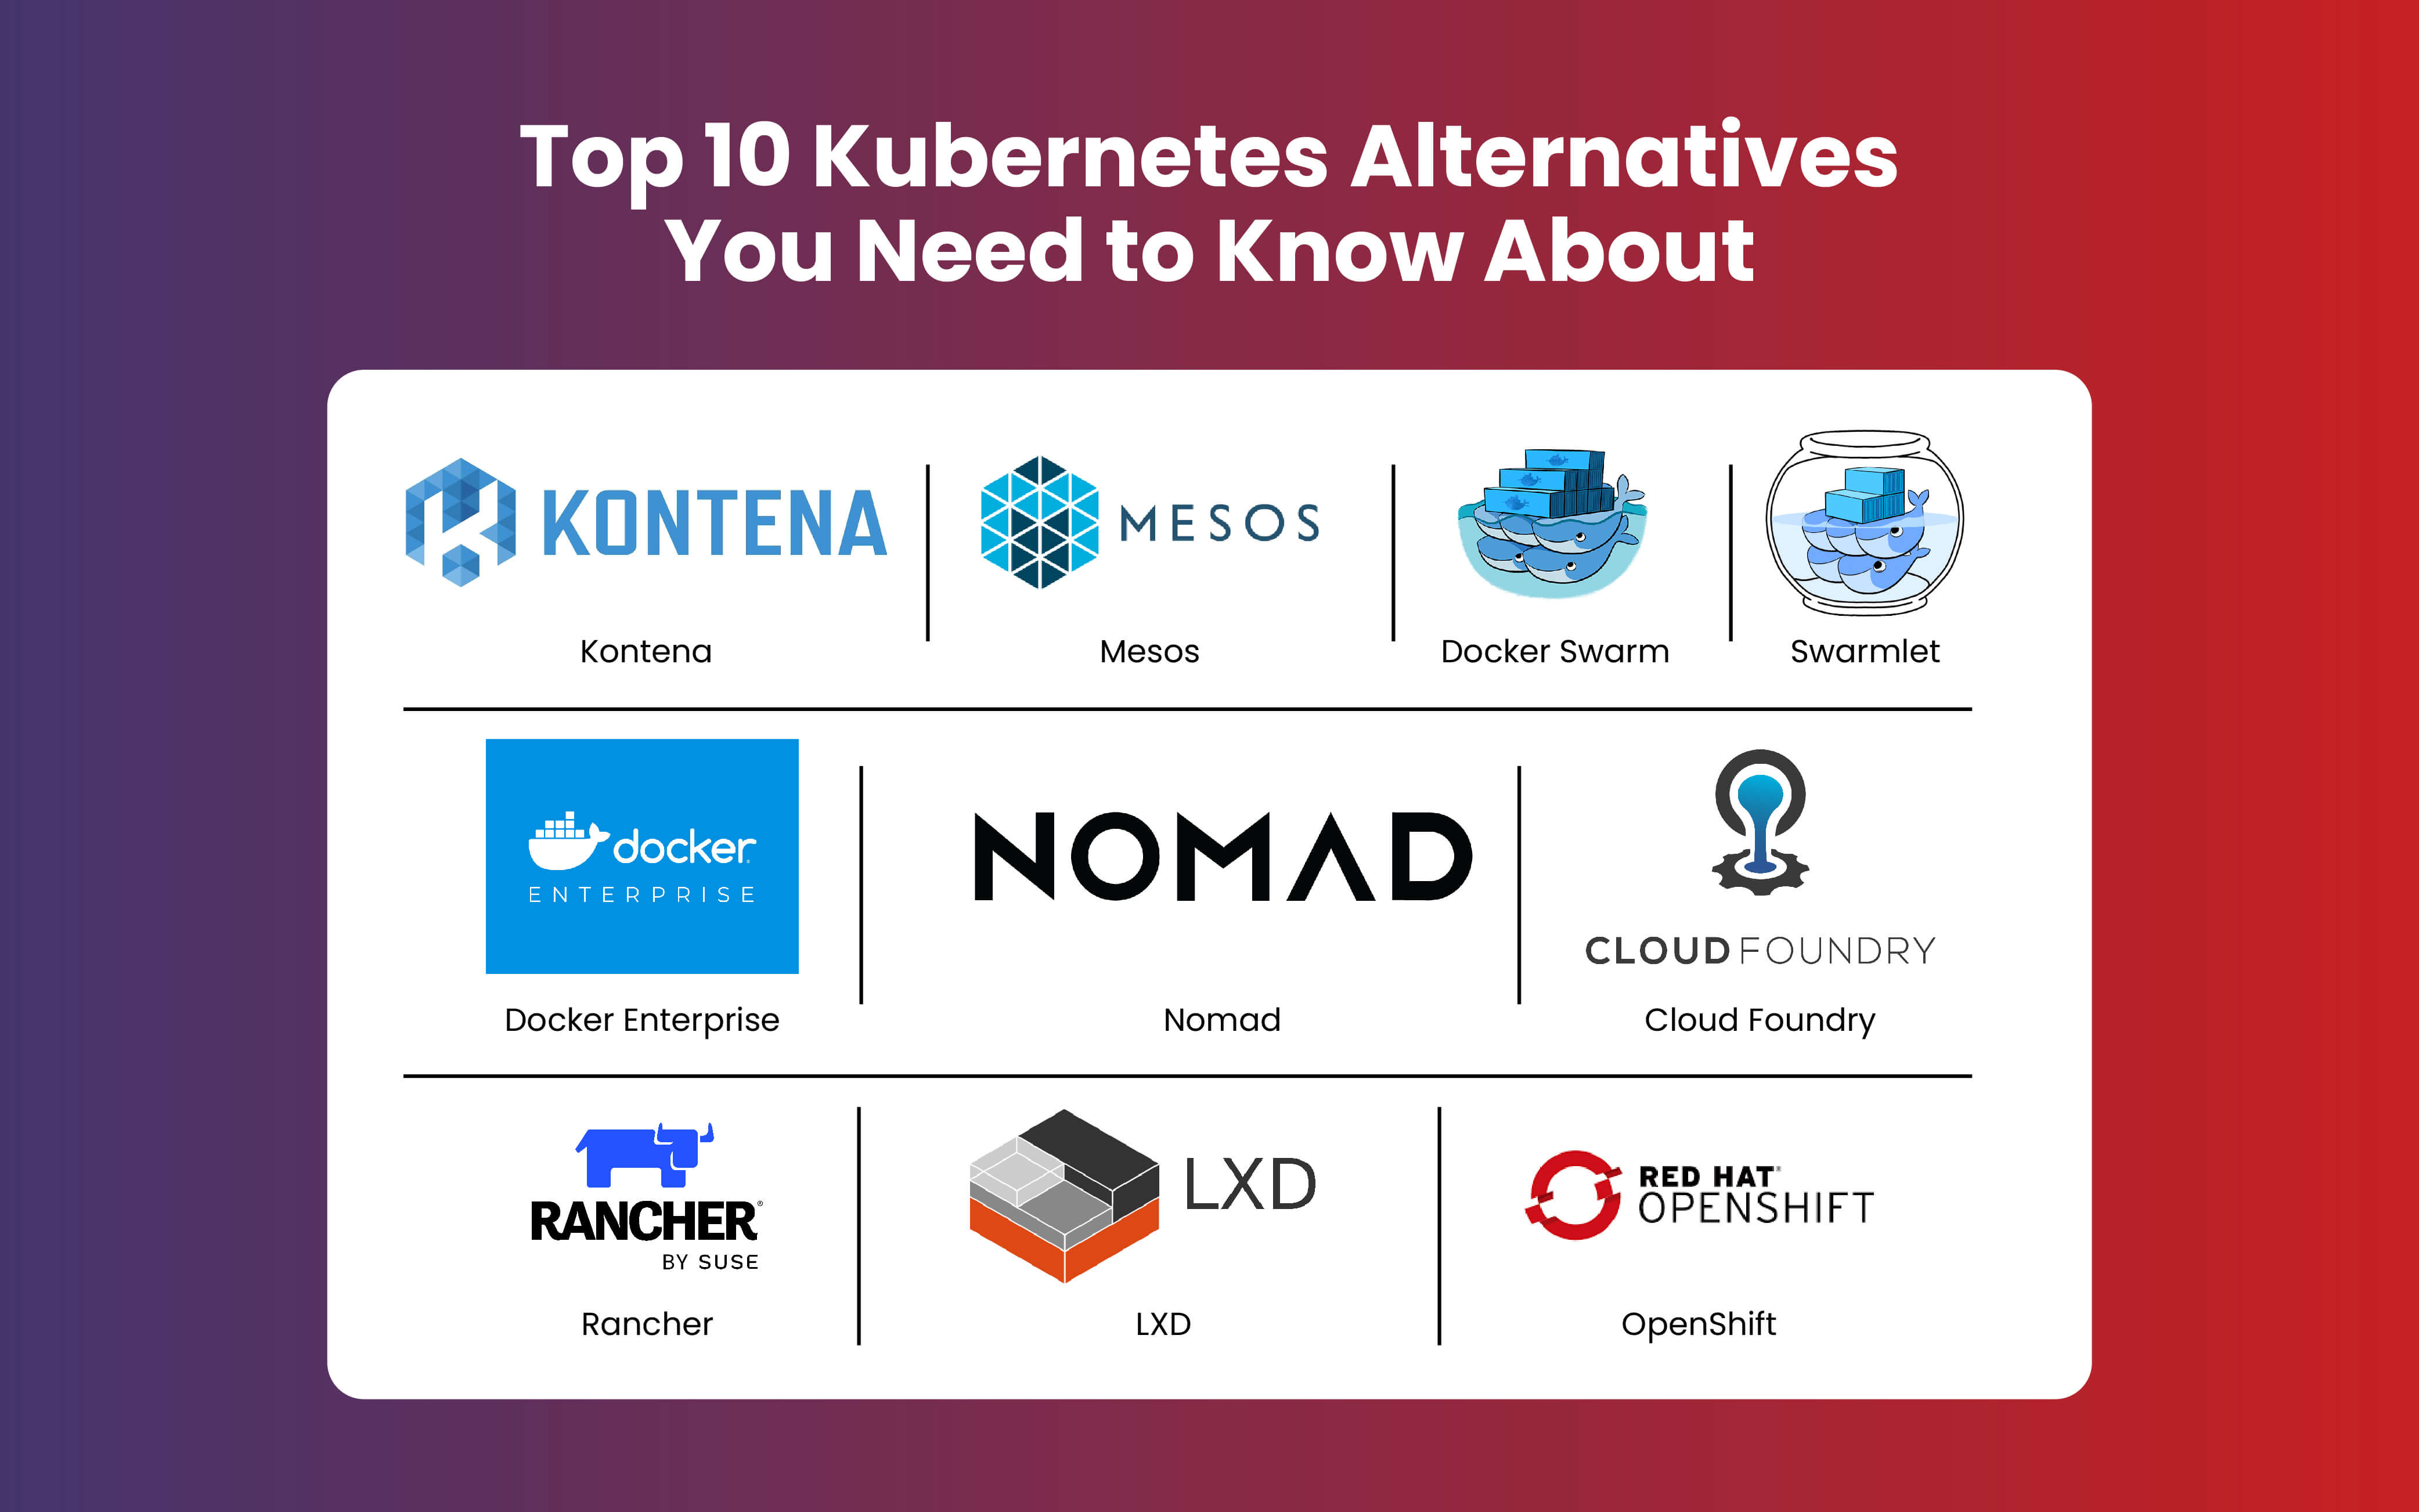 The Top 10 Kubernetes Alternatives You Need to Know About